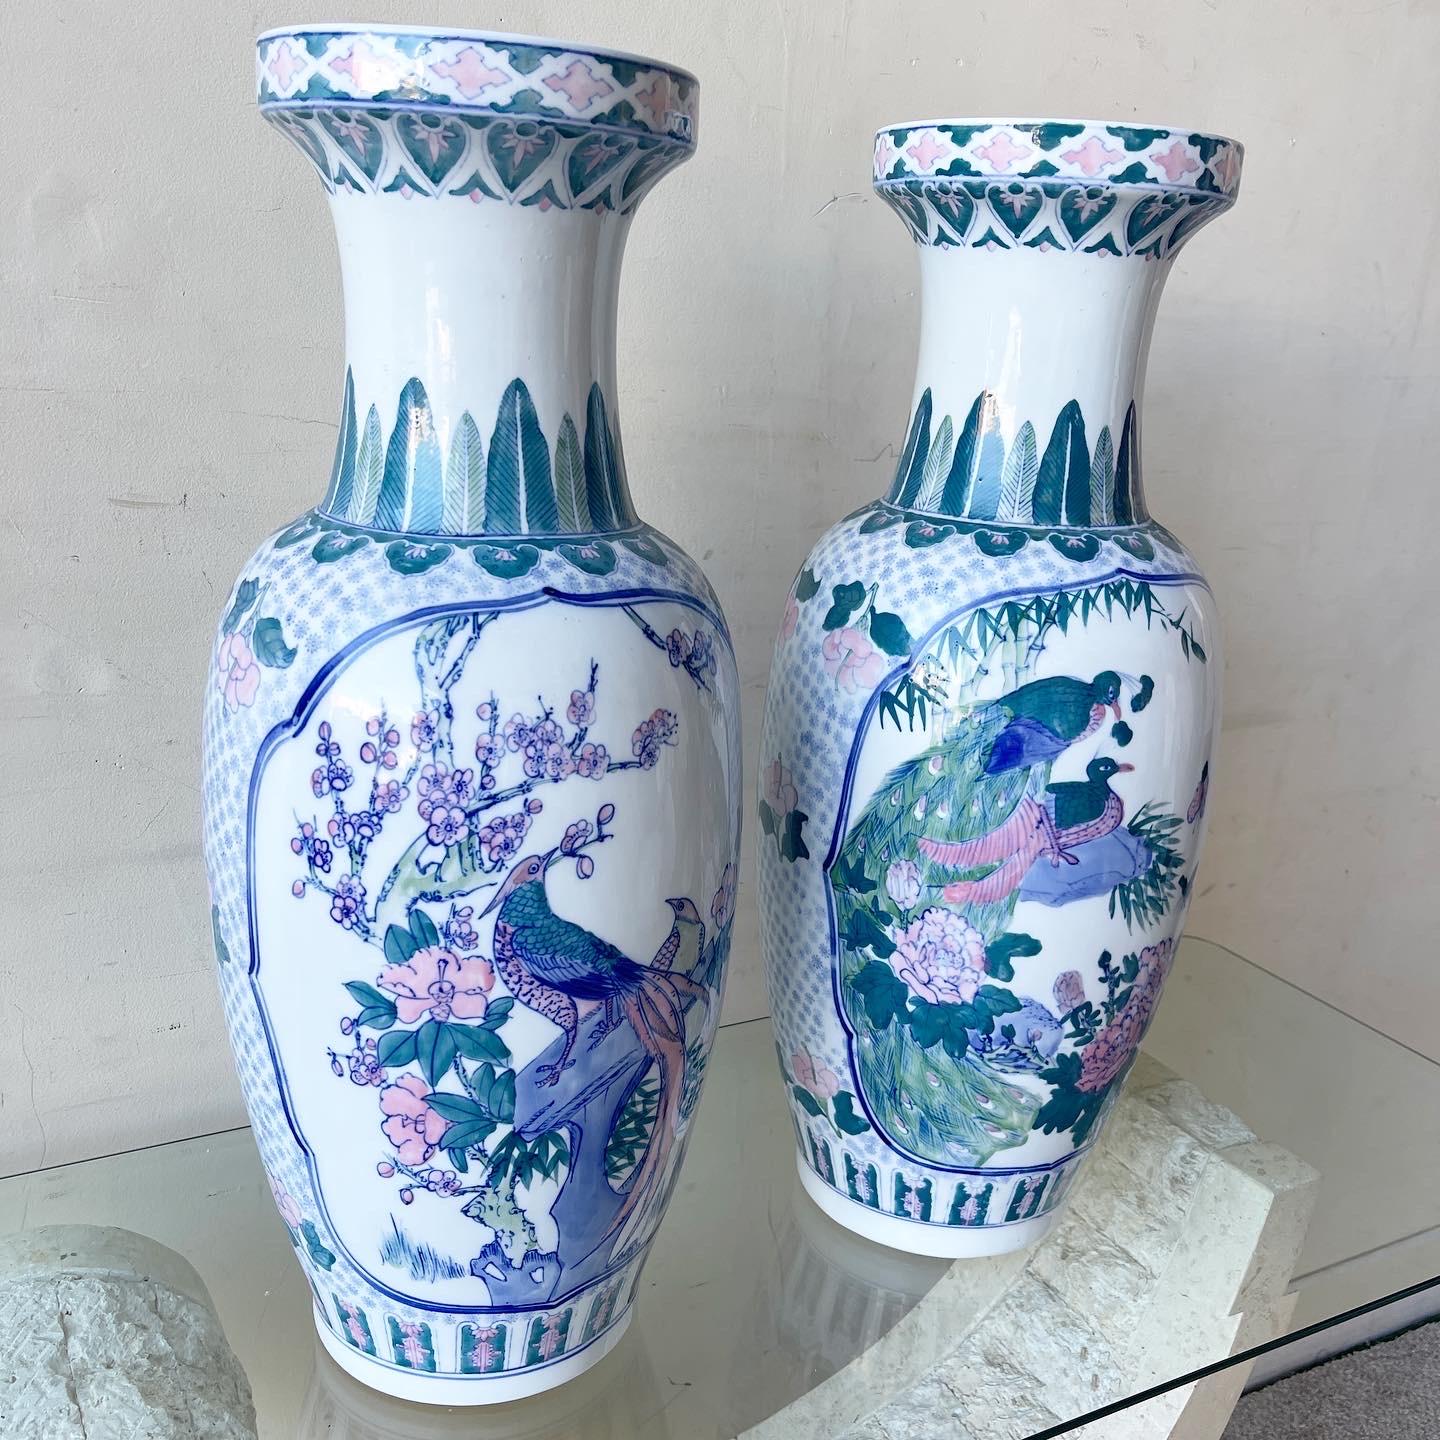 Incredible pair of vintage chinoiserie porcelain floor vases. Each feature a fantastic hand painted blue pink and green display of birds in the flowers.